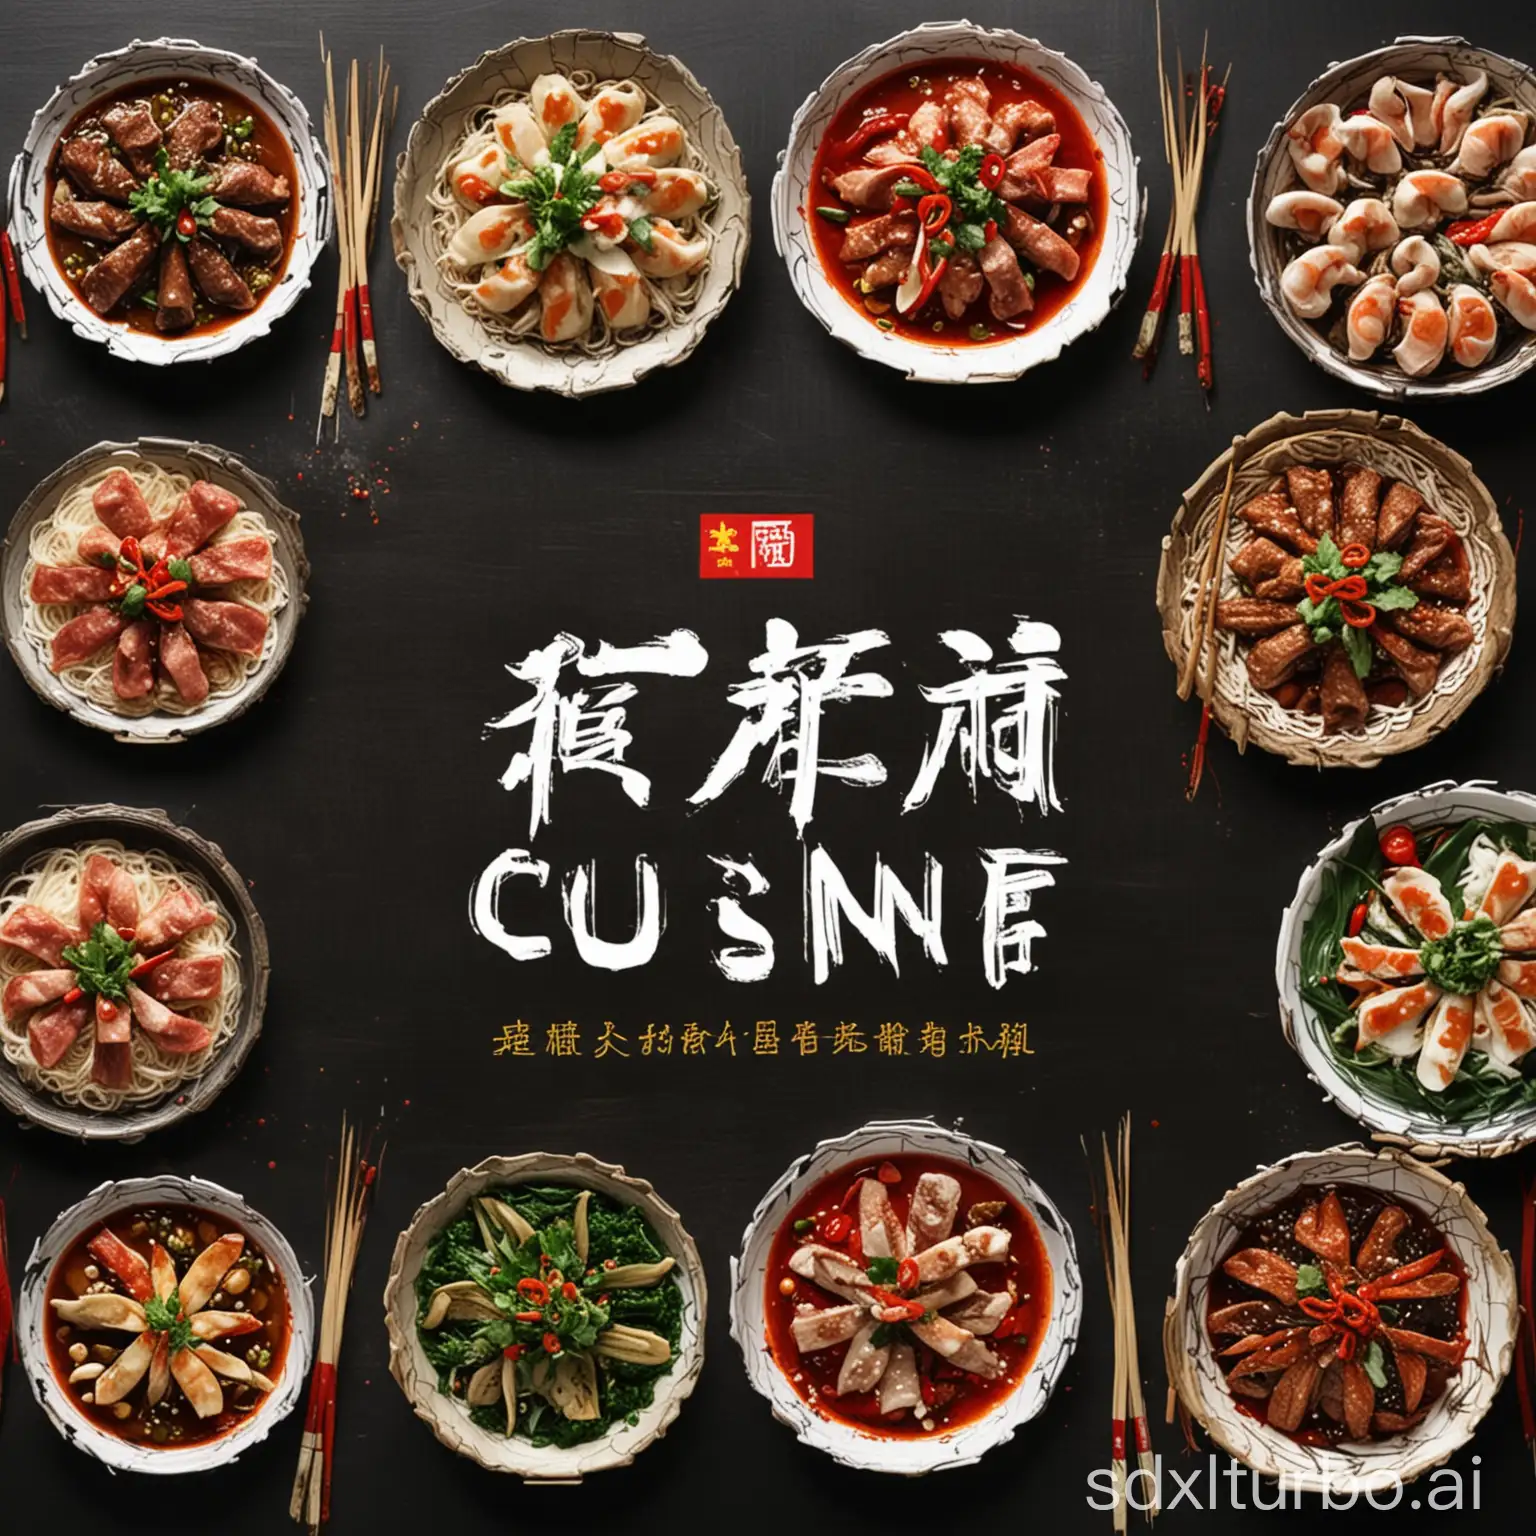 Paint an image of Ninghai cuisine from China as a video cover